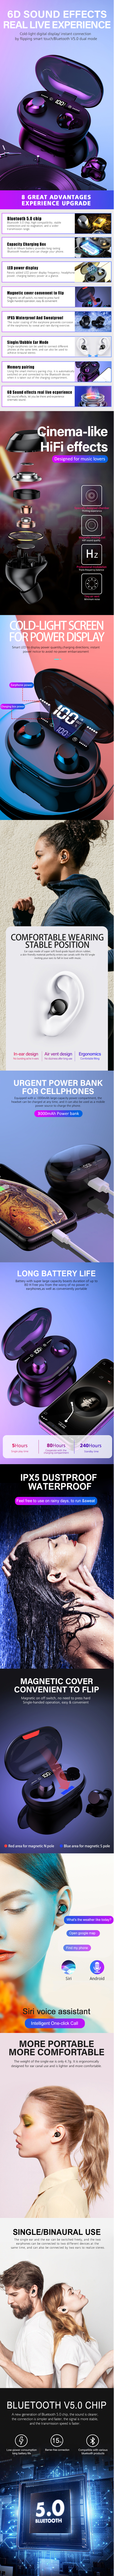 TWS Earbuds with Power Bank, Power Bank TWS Earbuds,Bluetooth Headset with Power Bank, Power Bank Bluetooth Earphone, C8S TWS Earbuds,LED Display TWS Earbuds,Bluetooth Earphone Manufacturer,TW40 TWS Earbuds Smart Watch,XG-17 TWS Earbuds,i60 TWS Earbuds,M2 TWS Earbuds,T1 TWS Earbuds,APTx TWS Earbuds,airpods OEM Manufacturer,